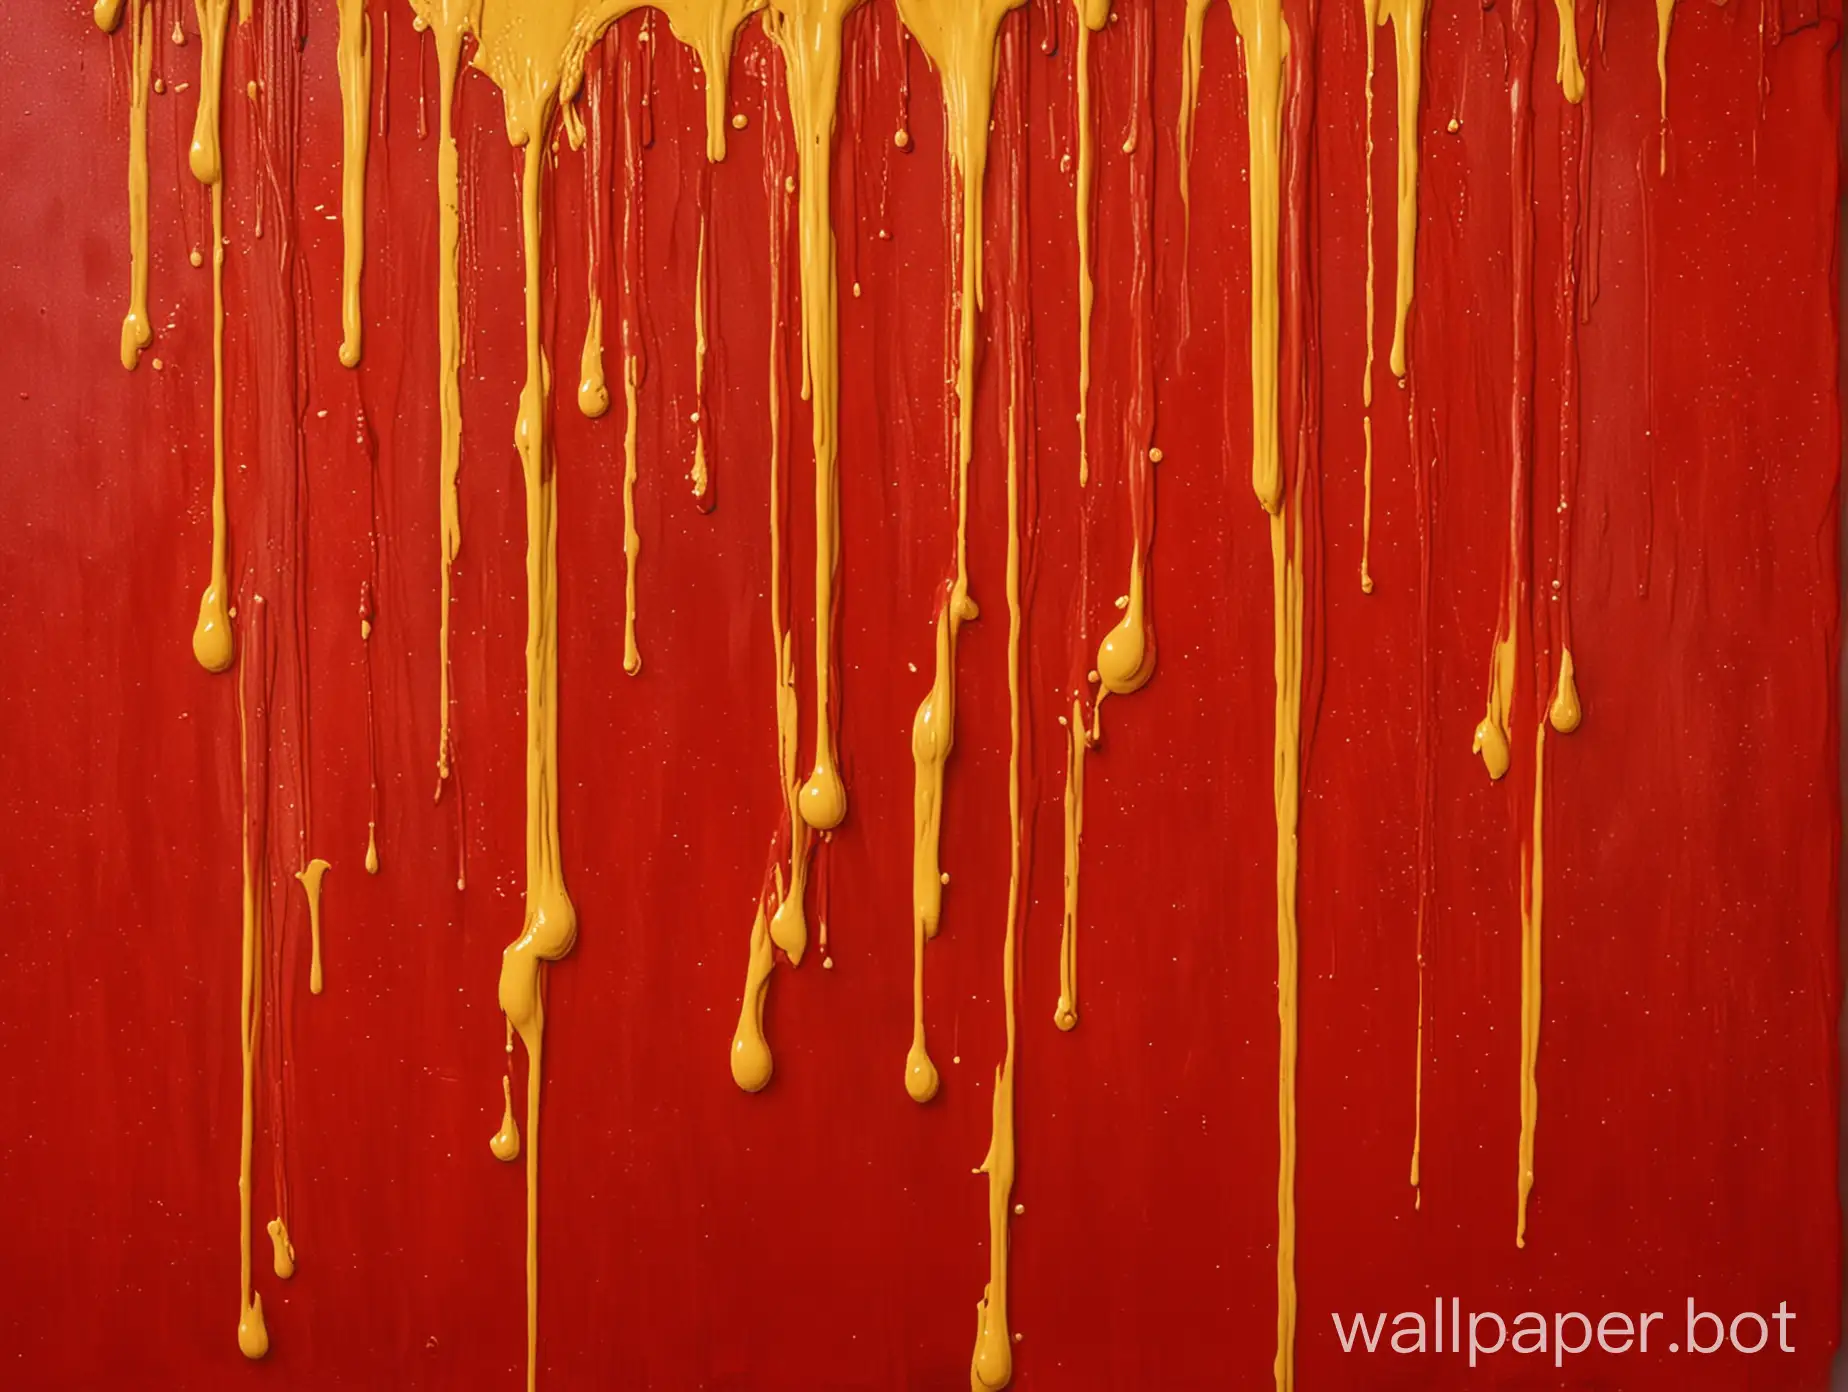 Vibrant-Red-Background-with-Yellow-Dripping-Paint-Swirls